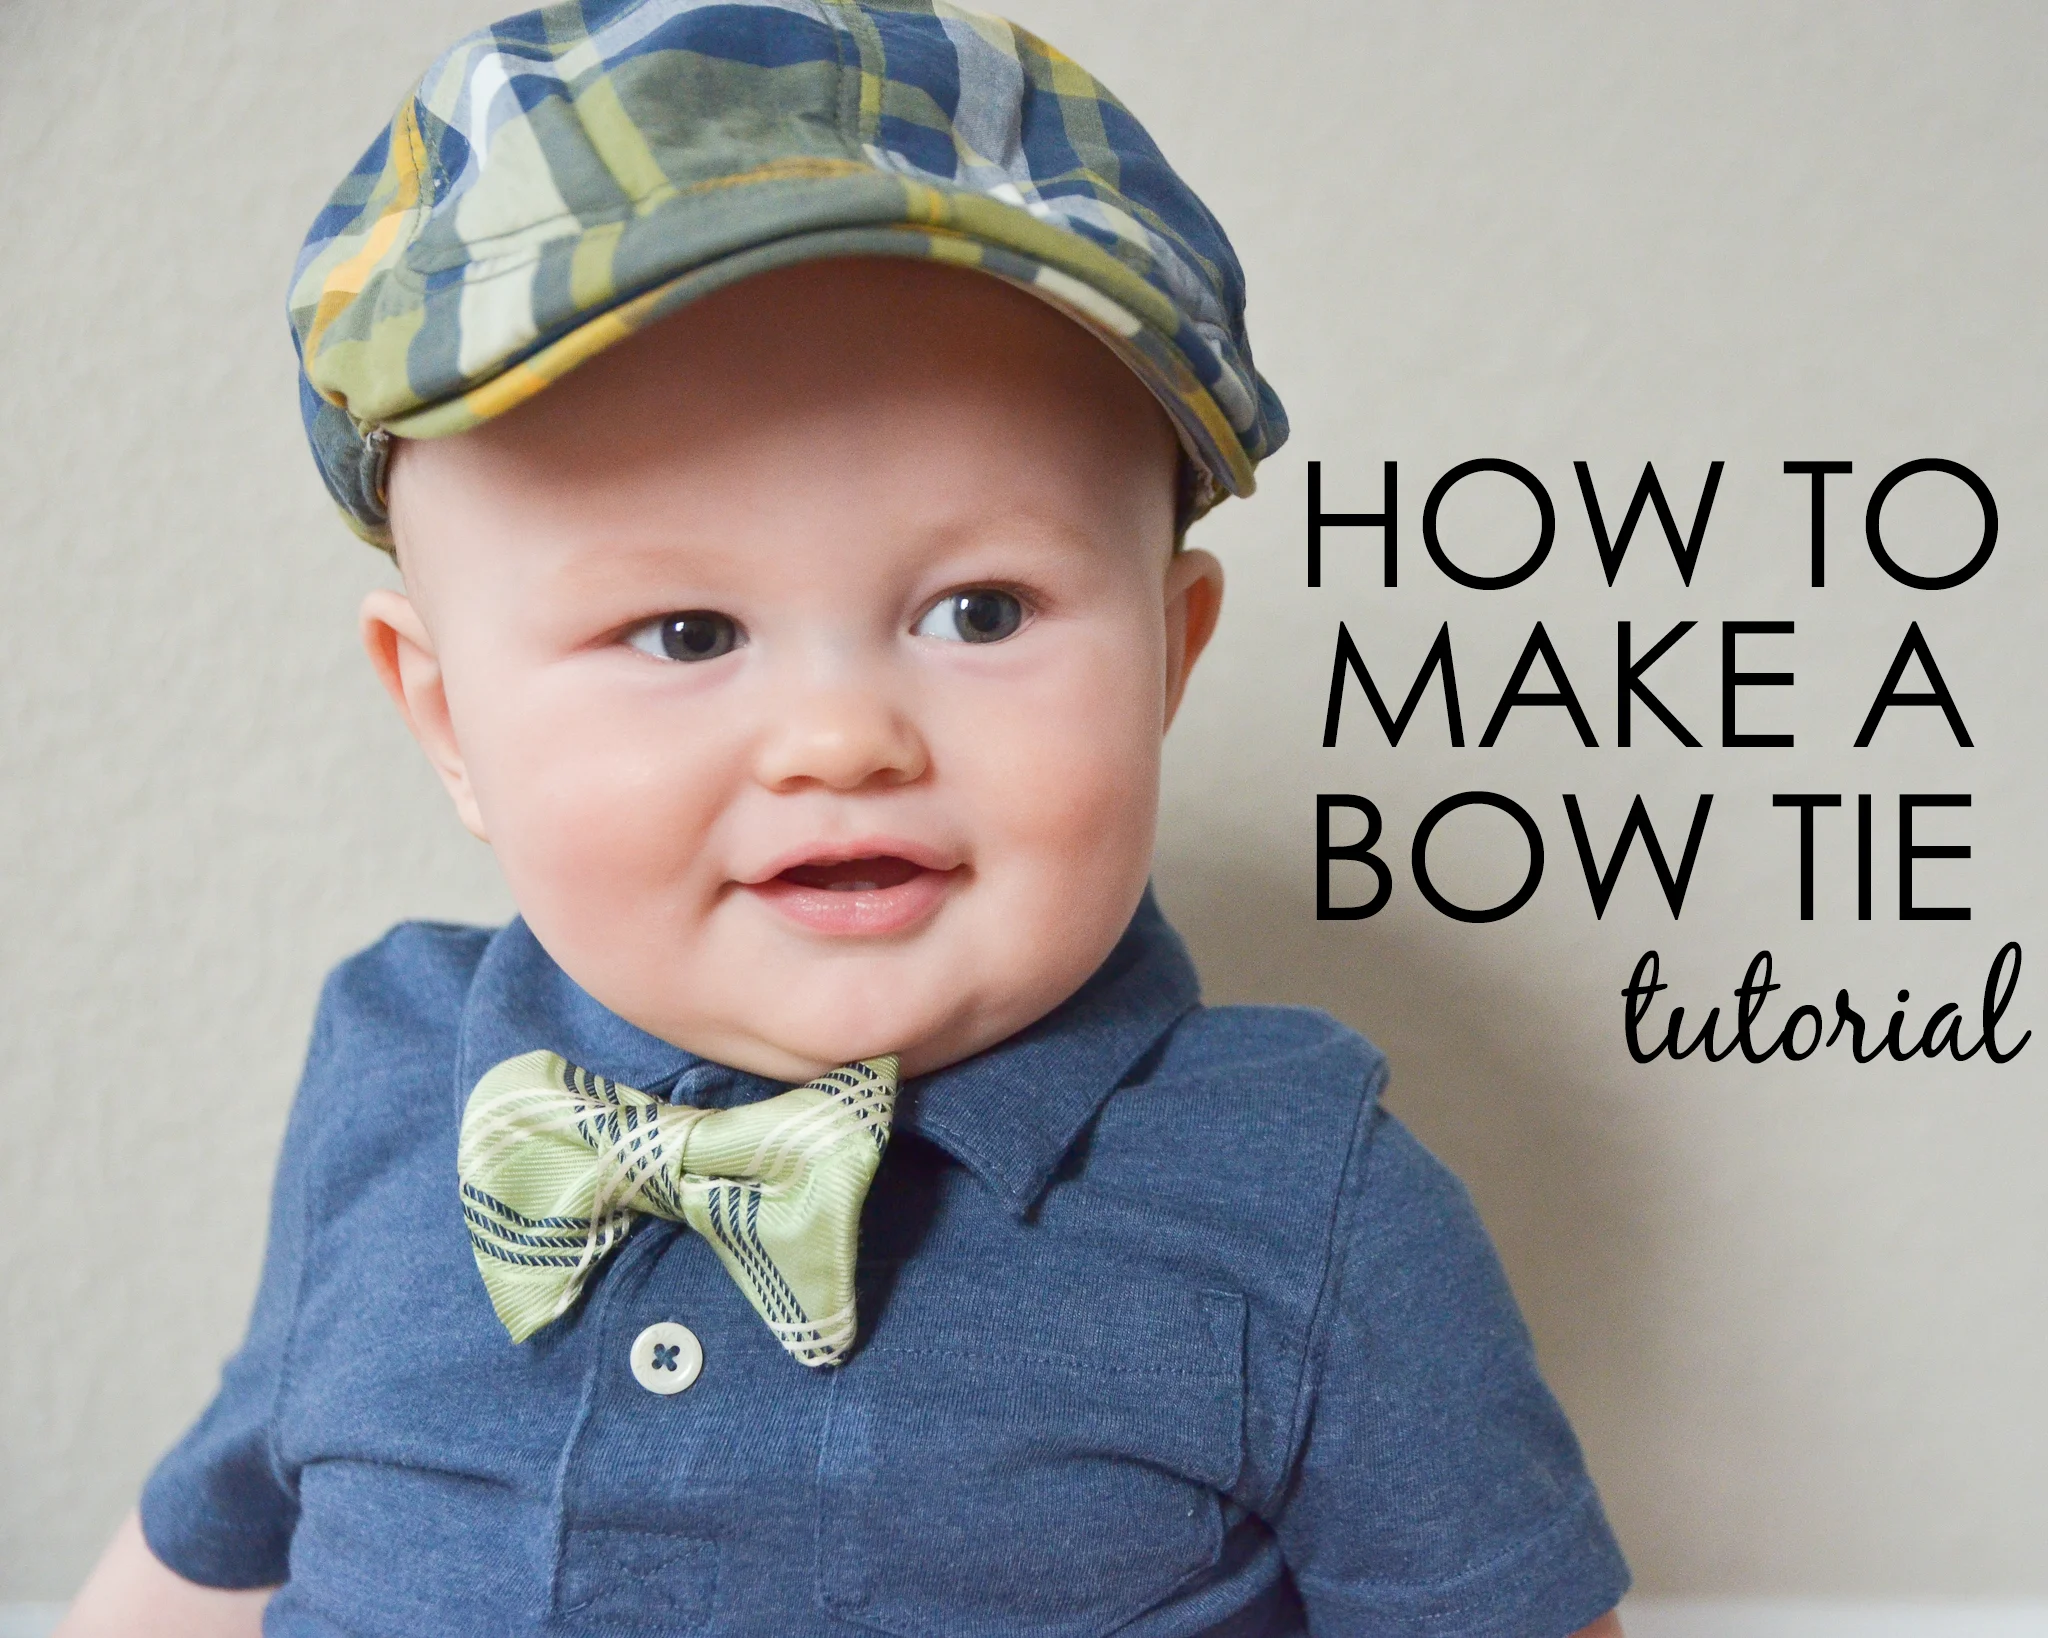 How to Make a Bow Tie Tutorial